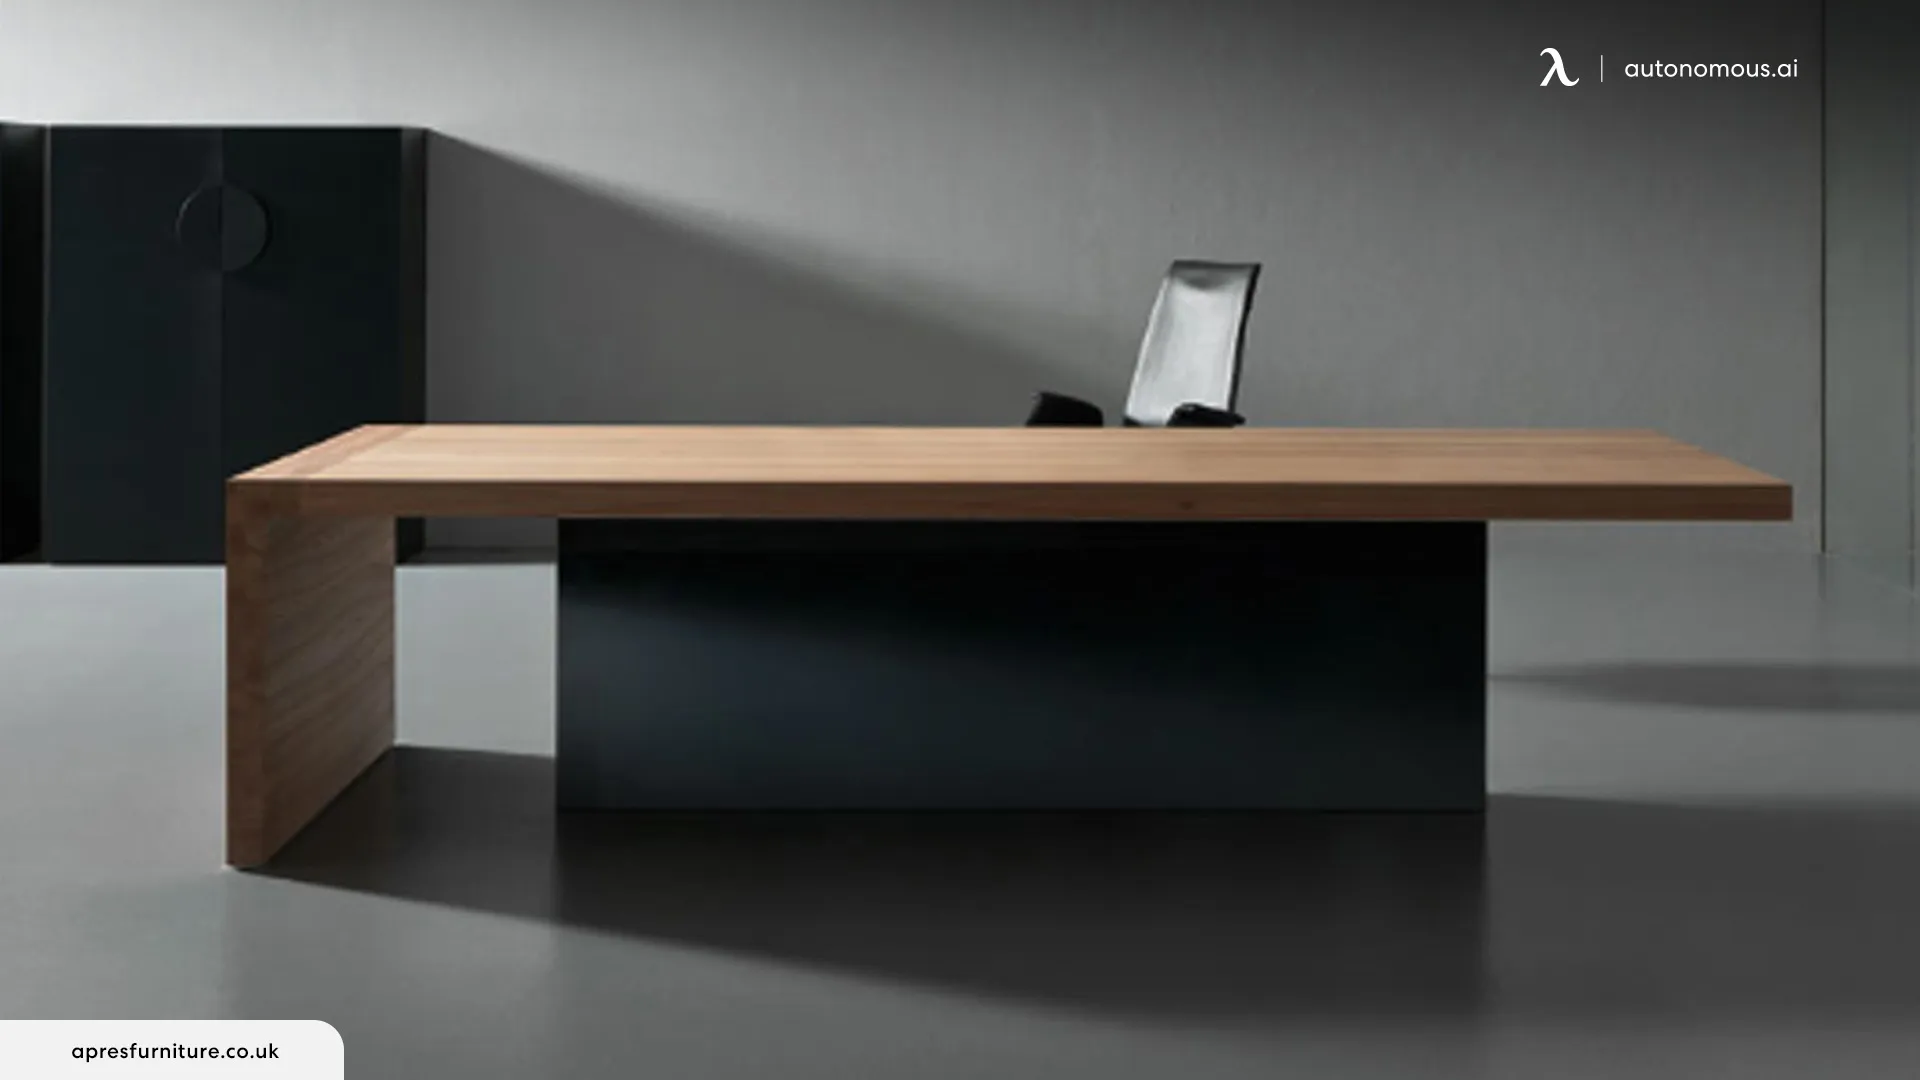 Why Are Simple Desks More Common in the Modern Workplace?